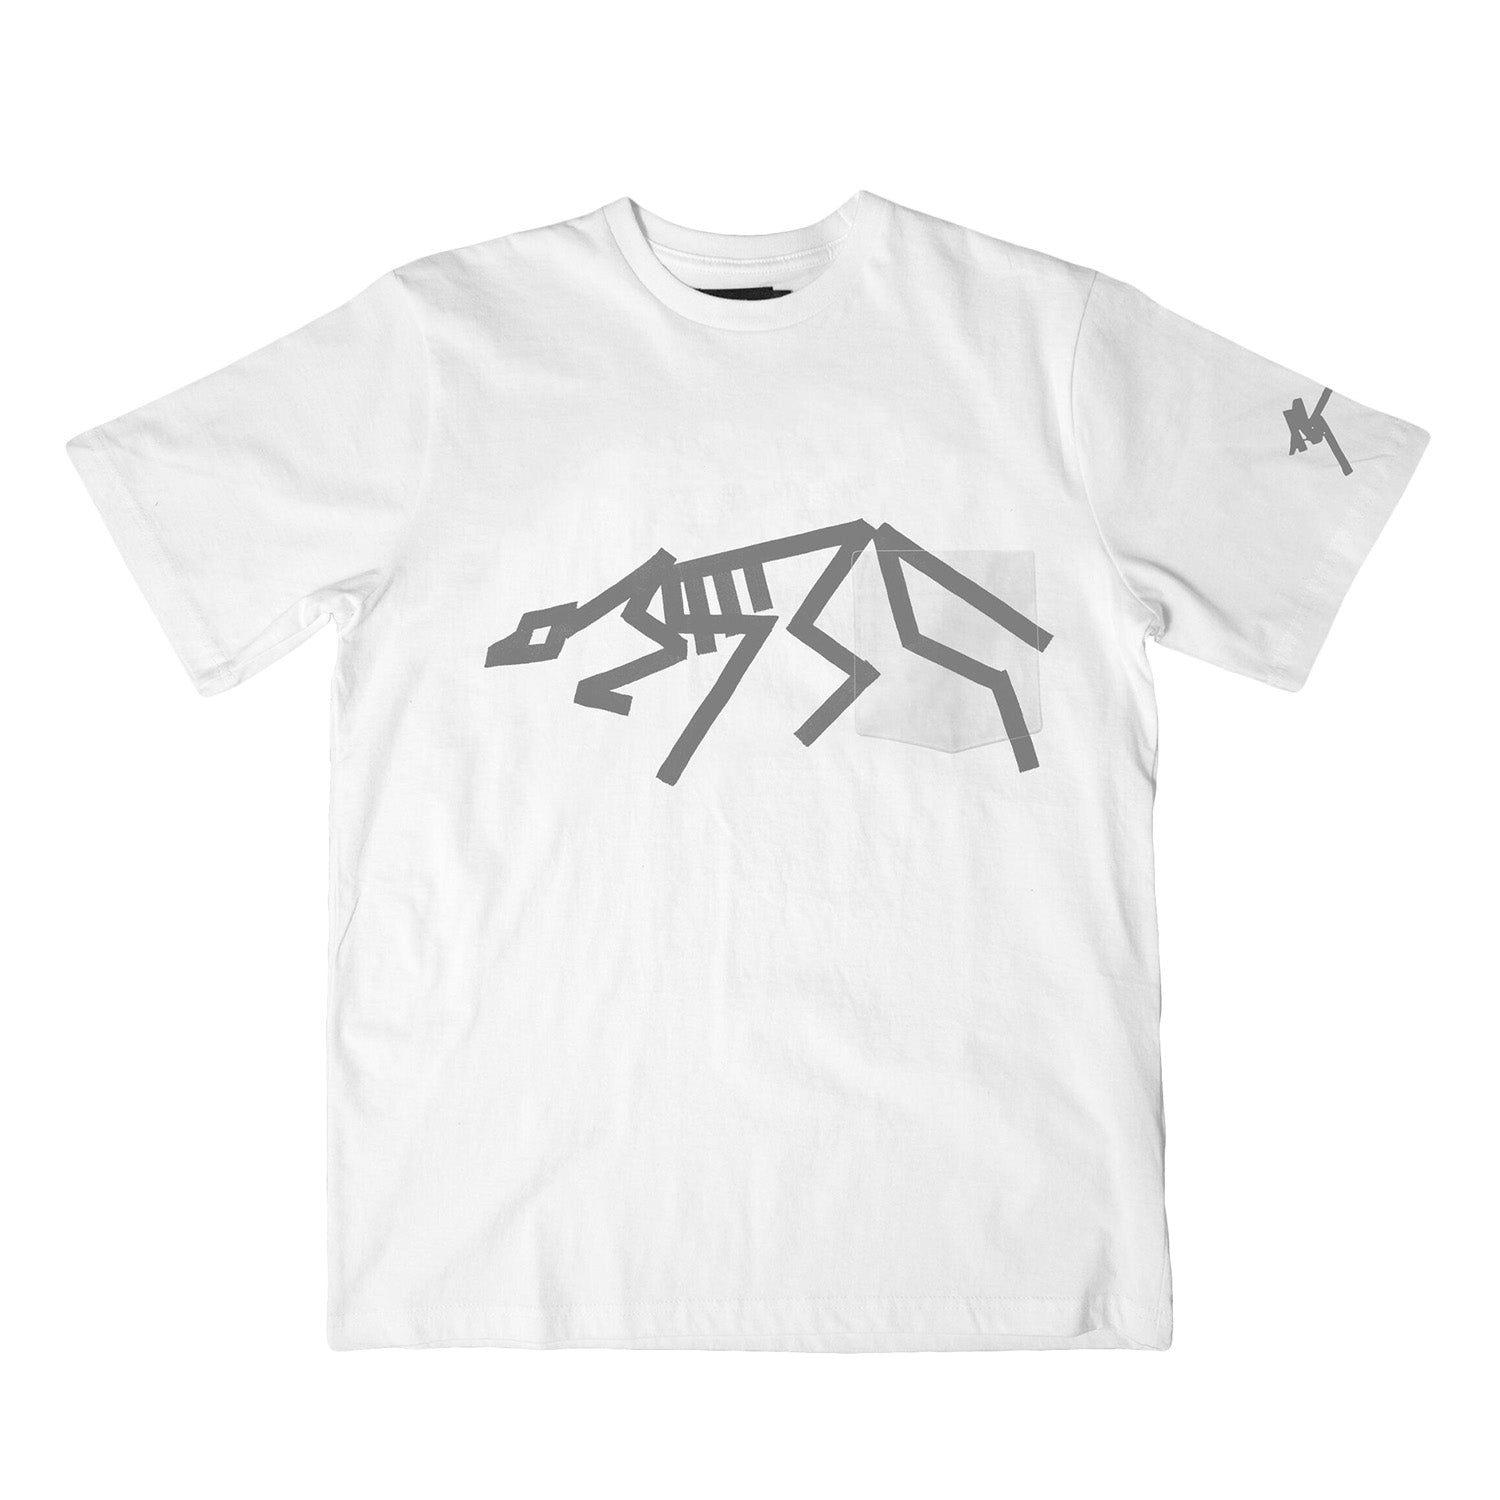 Raised By Wolves AG Stalk Pocket Tee White - T-SHIRTS - Canada